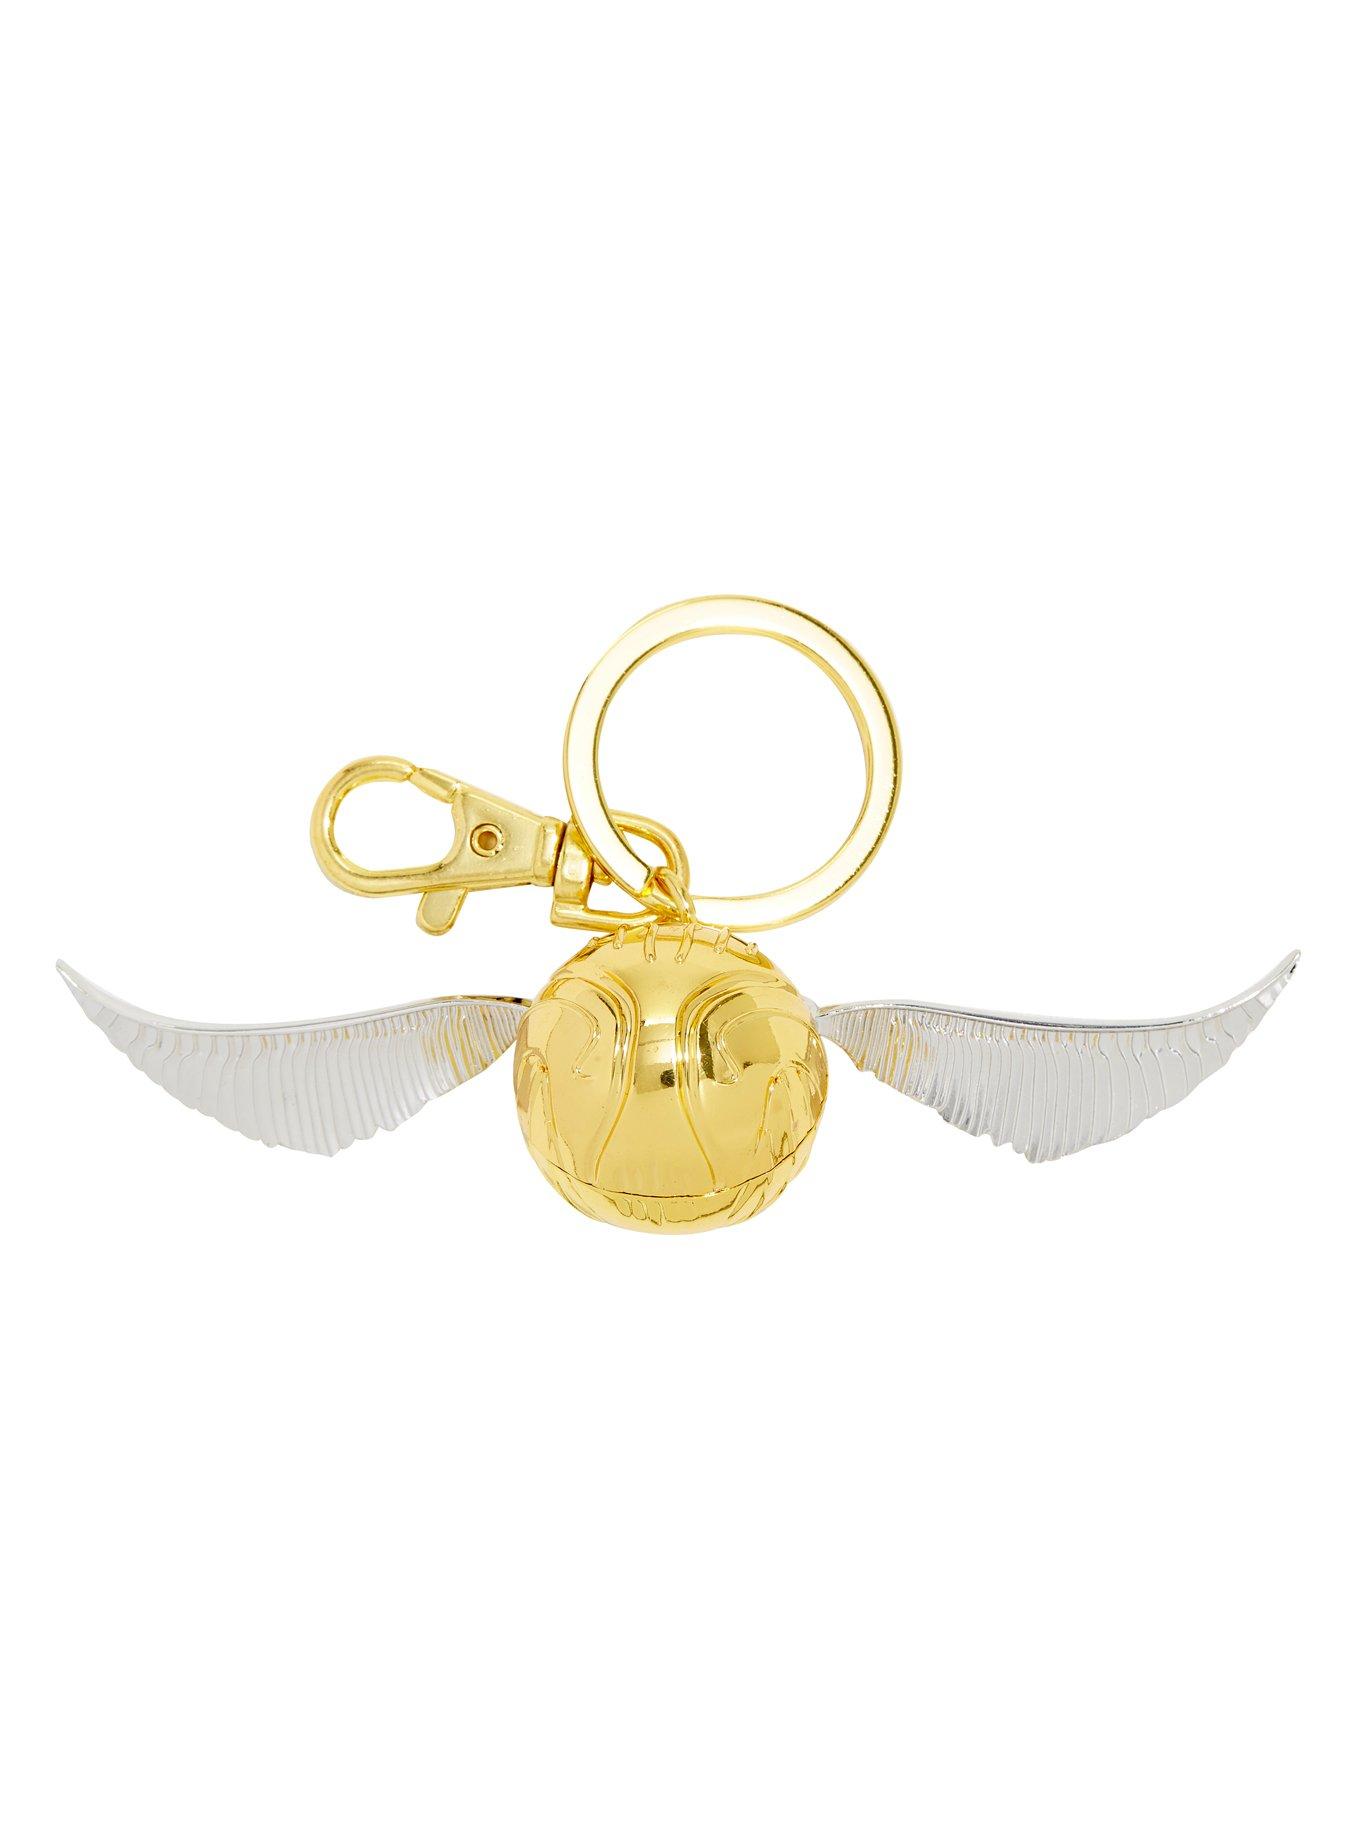 Harry Potter Golden Snitch Key Chain, , hi-res